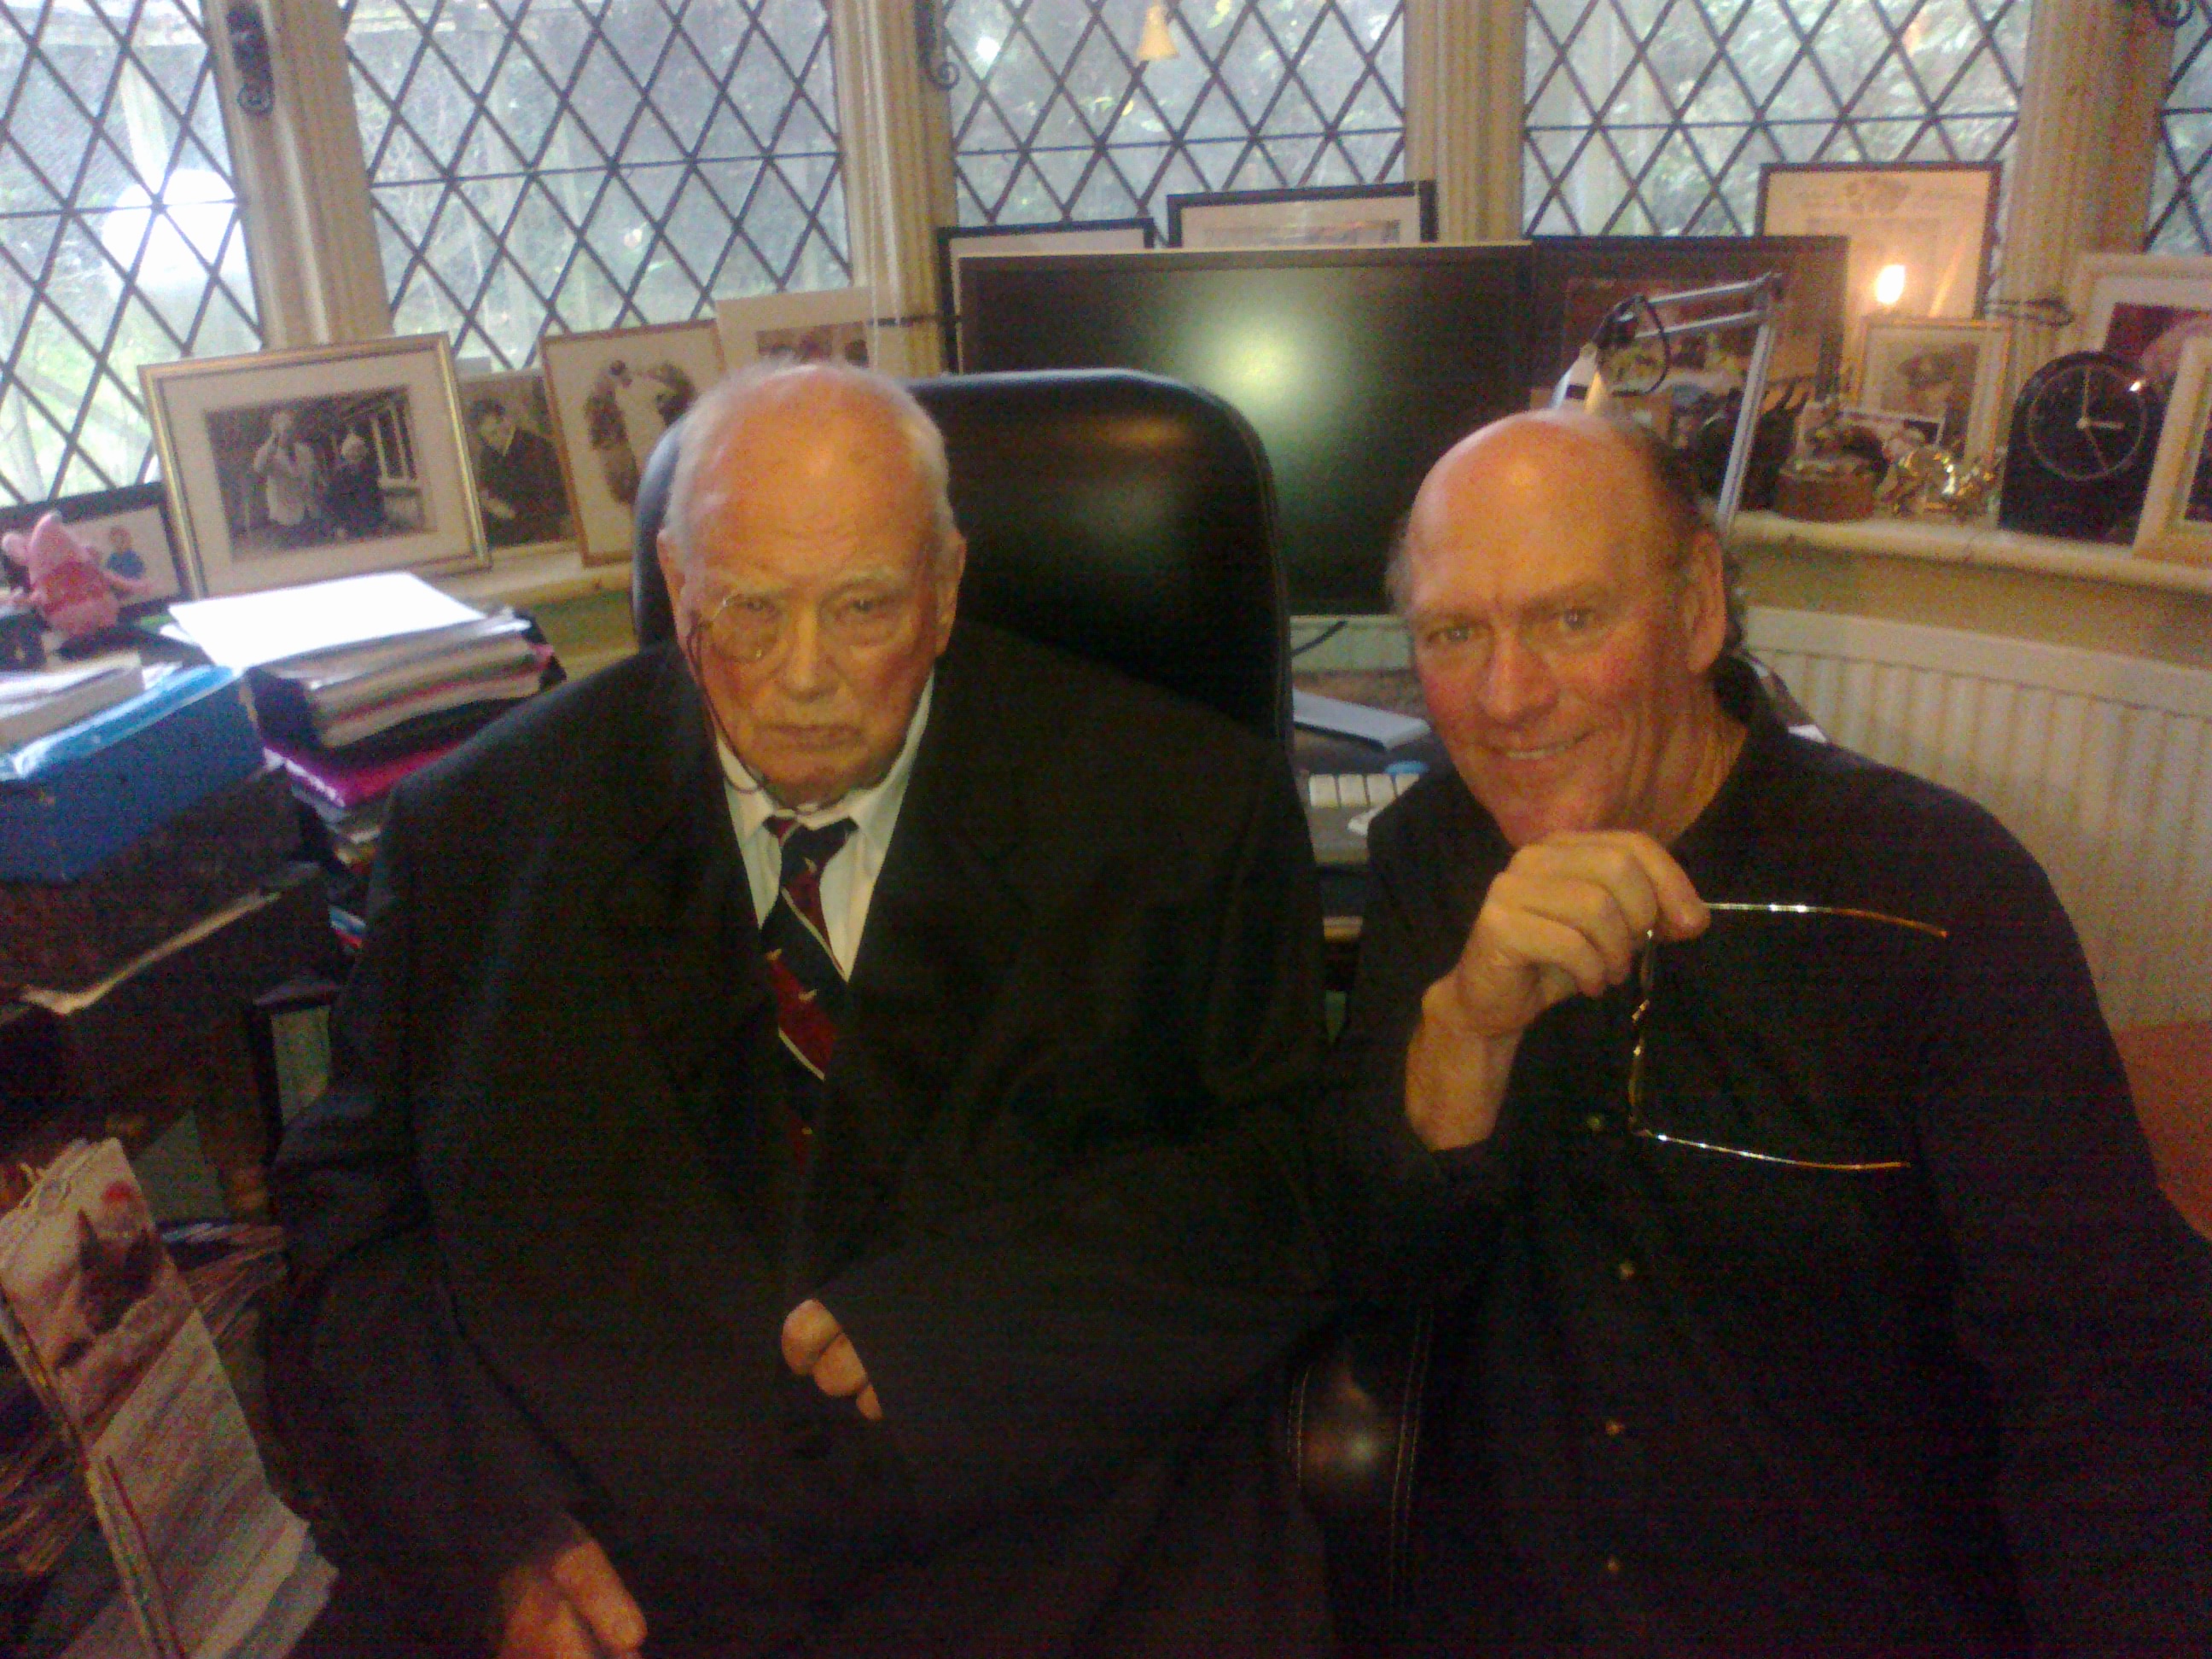 Sir Patrick Moore and Randall Perry at Patrick's home in Selsea, UK.